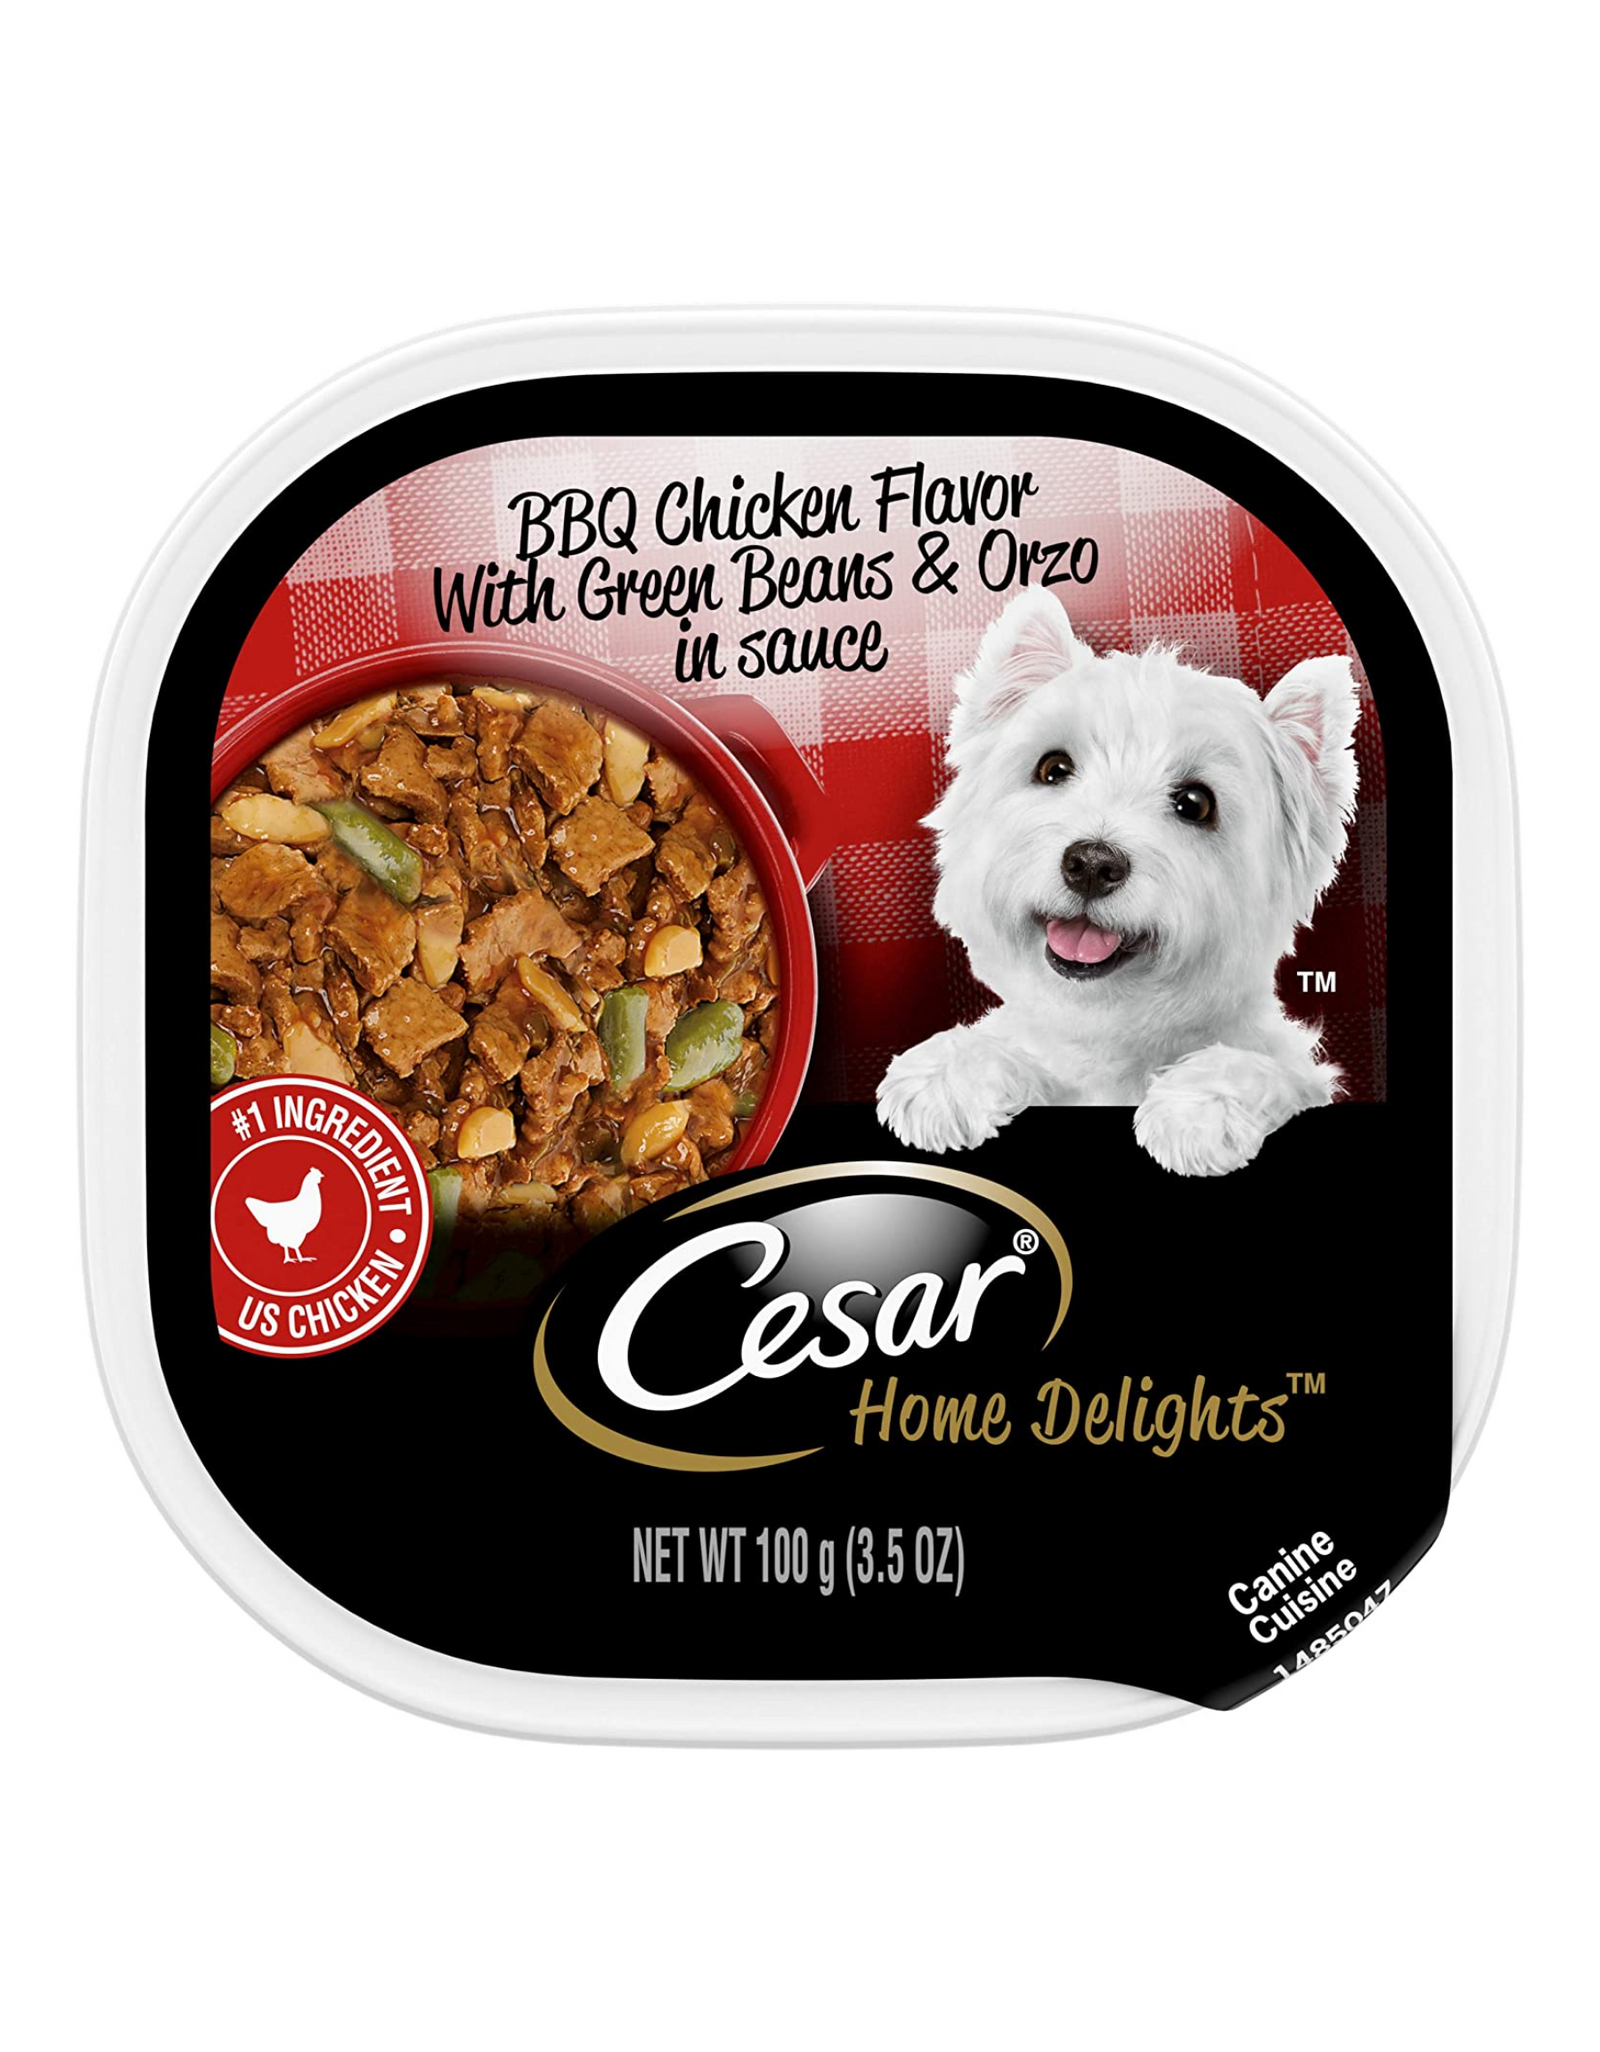 CESAR HOME DELIGHTS Adult BBQ Chicken Flavor with Green Beans & Orzo in Sauce, 3.5 oz, 24 Count